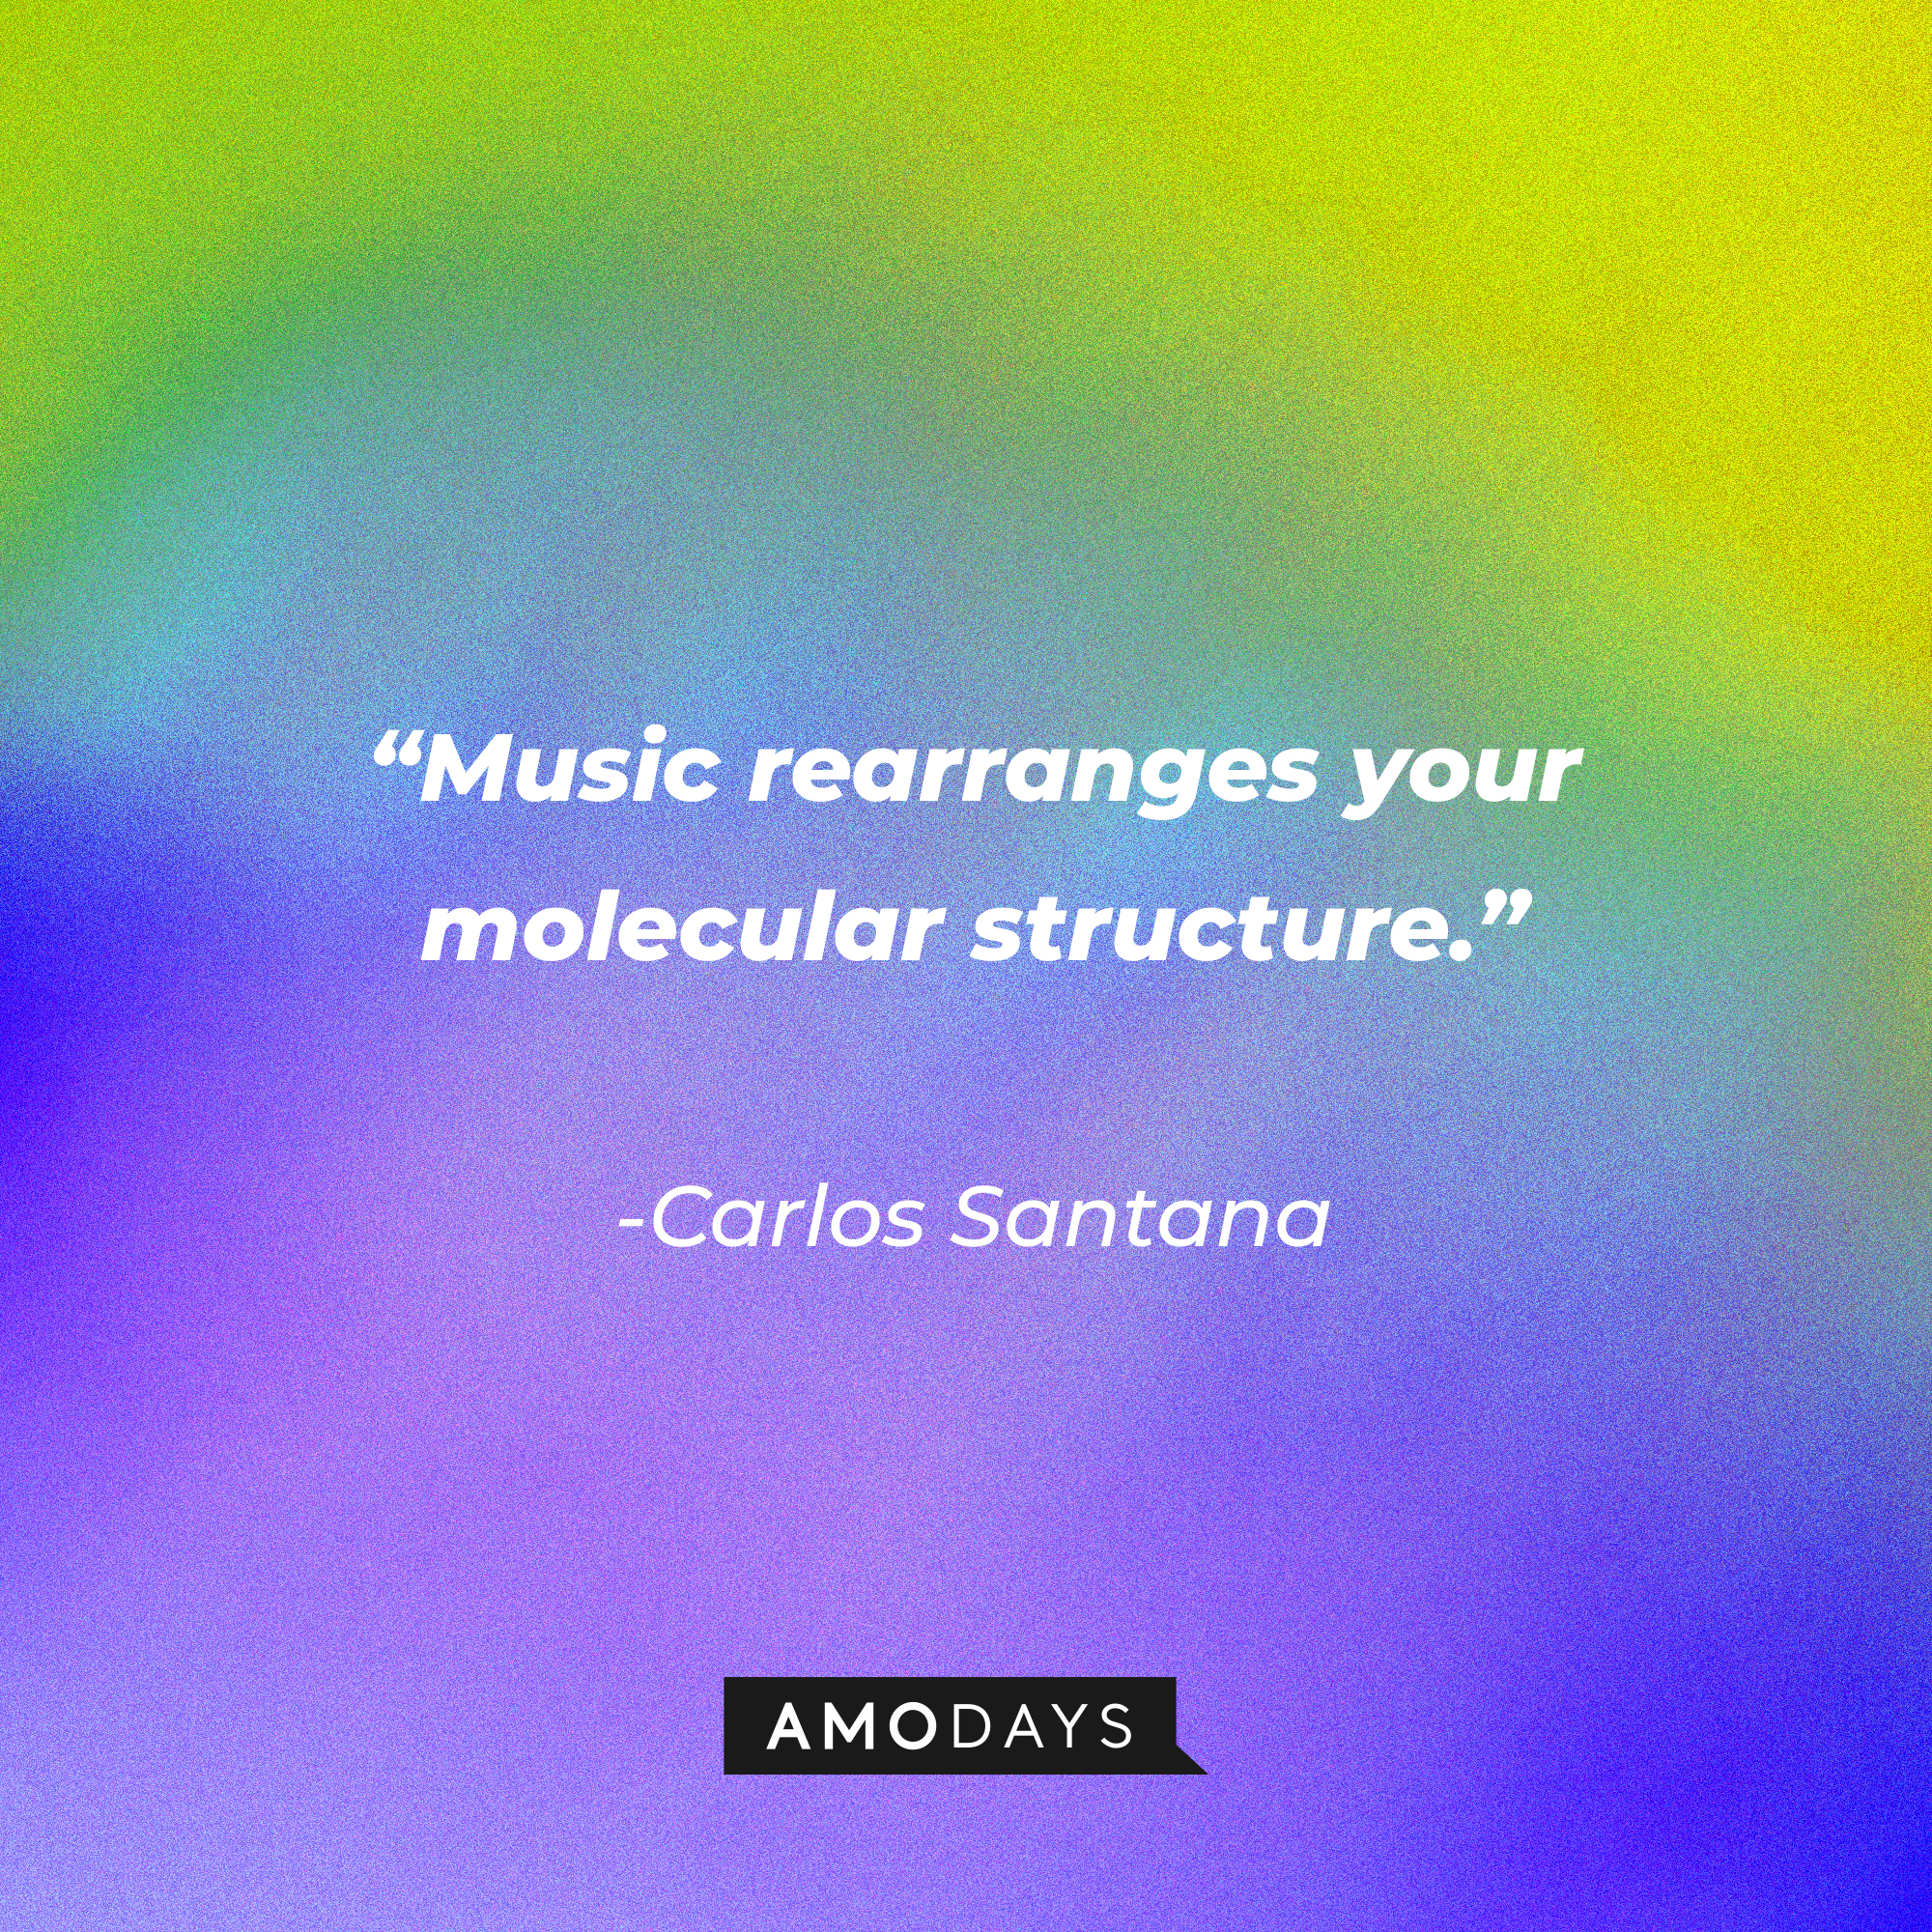 Carlos Santana’s quote: "Music rearranges your molecular structure." ┃Source: AmoDays